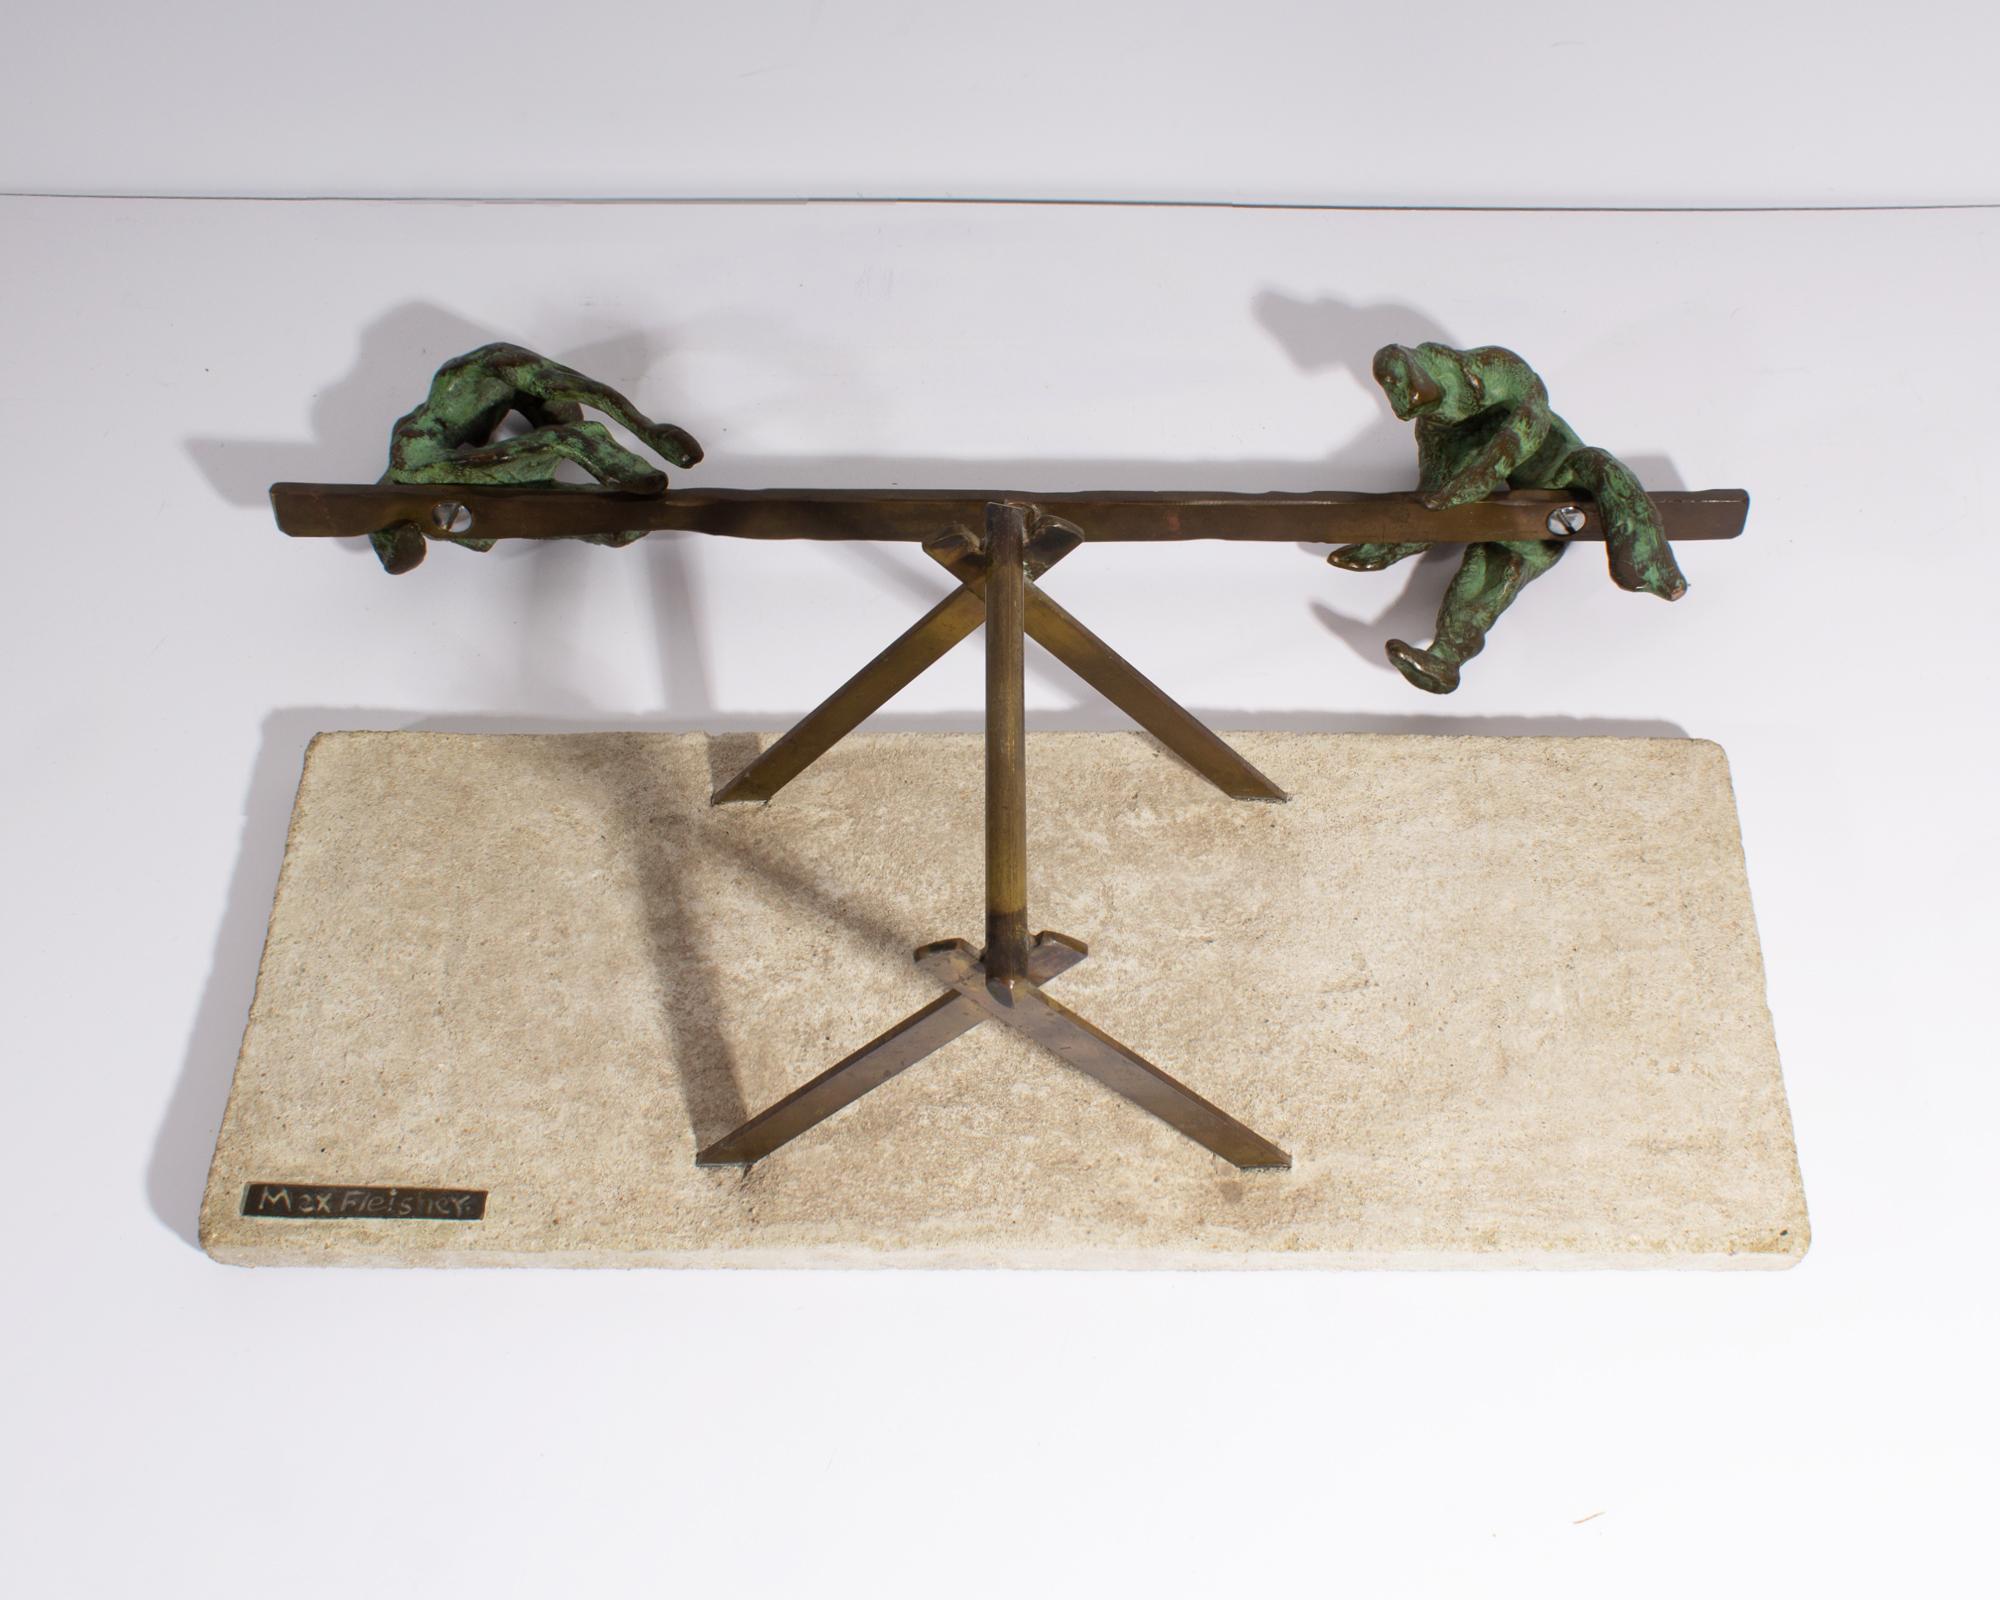 Max Fleisher Brutalist Bronze Sculpture of a Seesaw For Sale 1